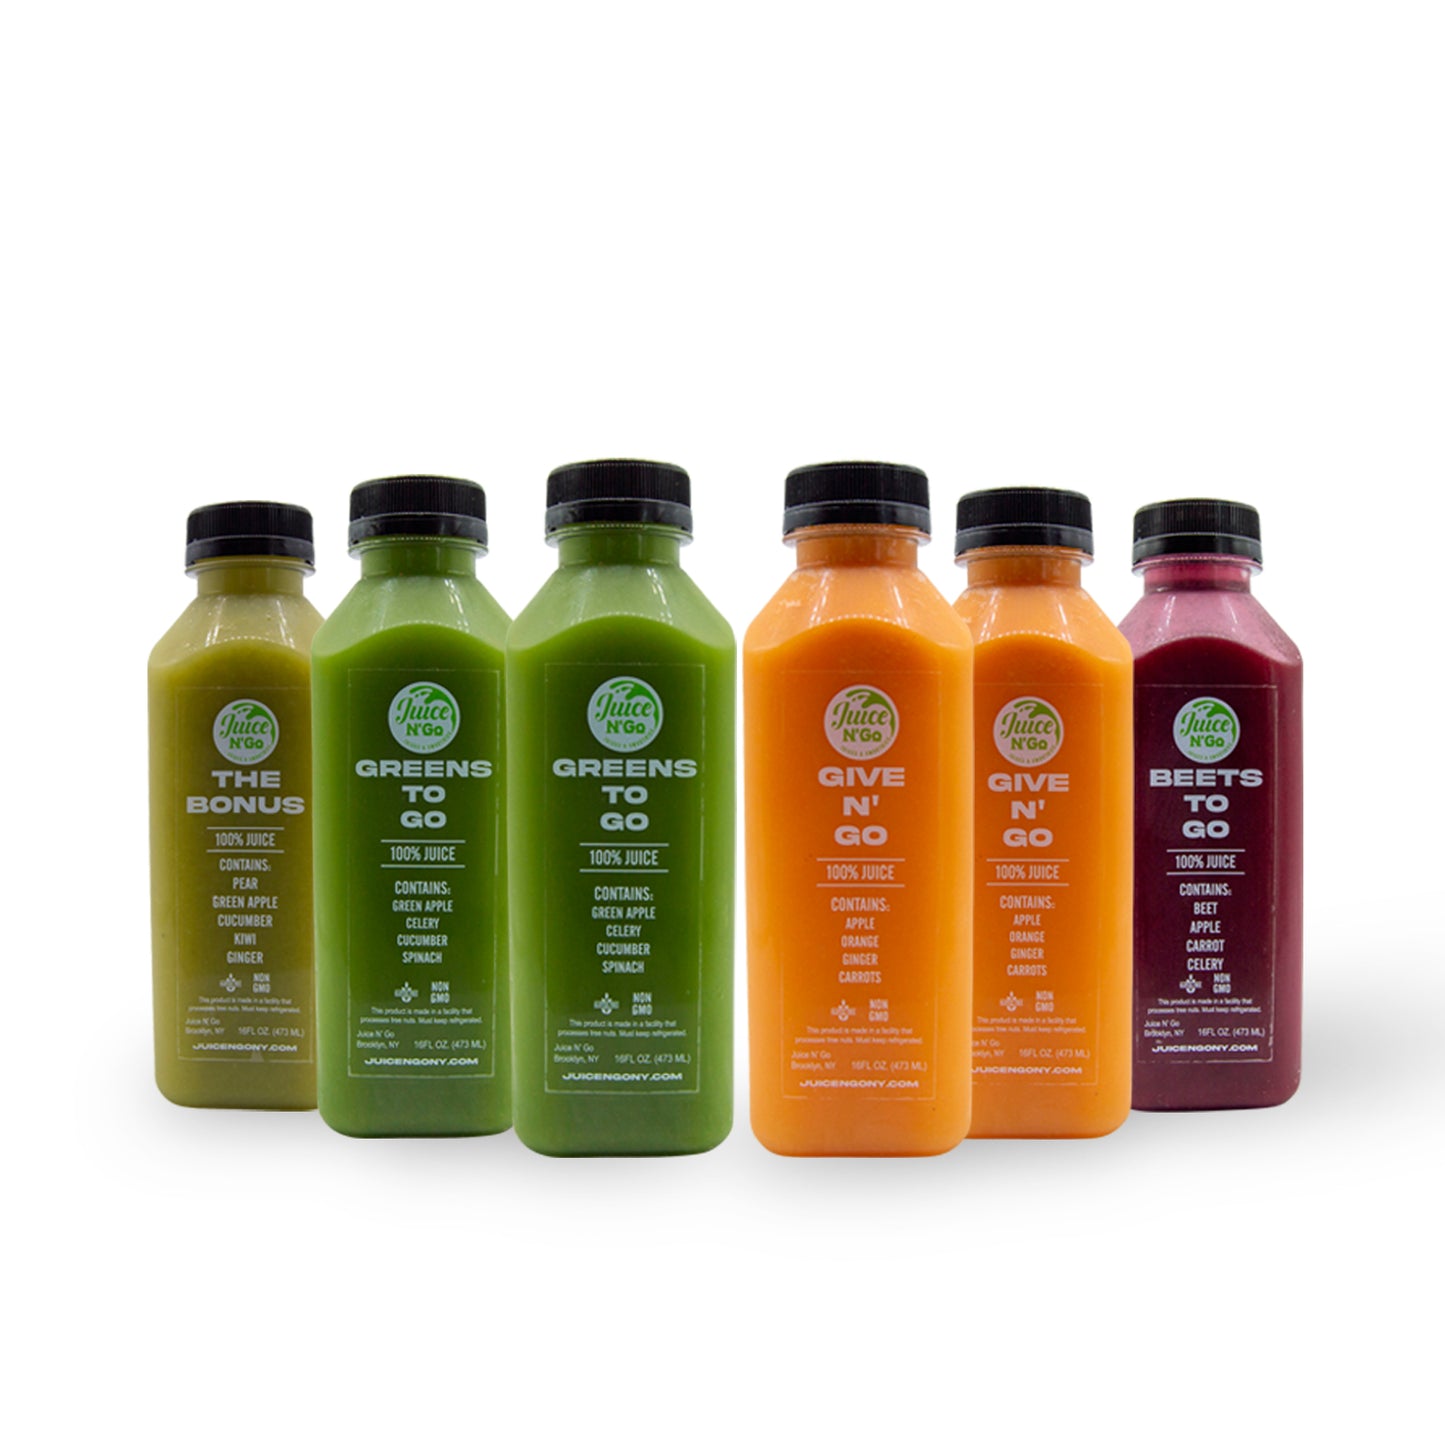 3 Day Reset Cleanse (18 Pack)